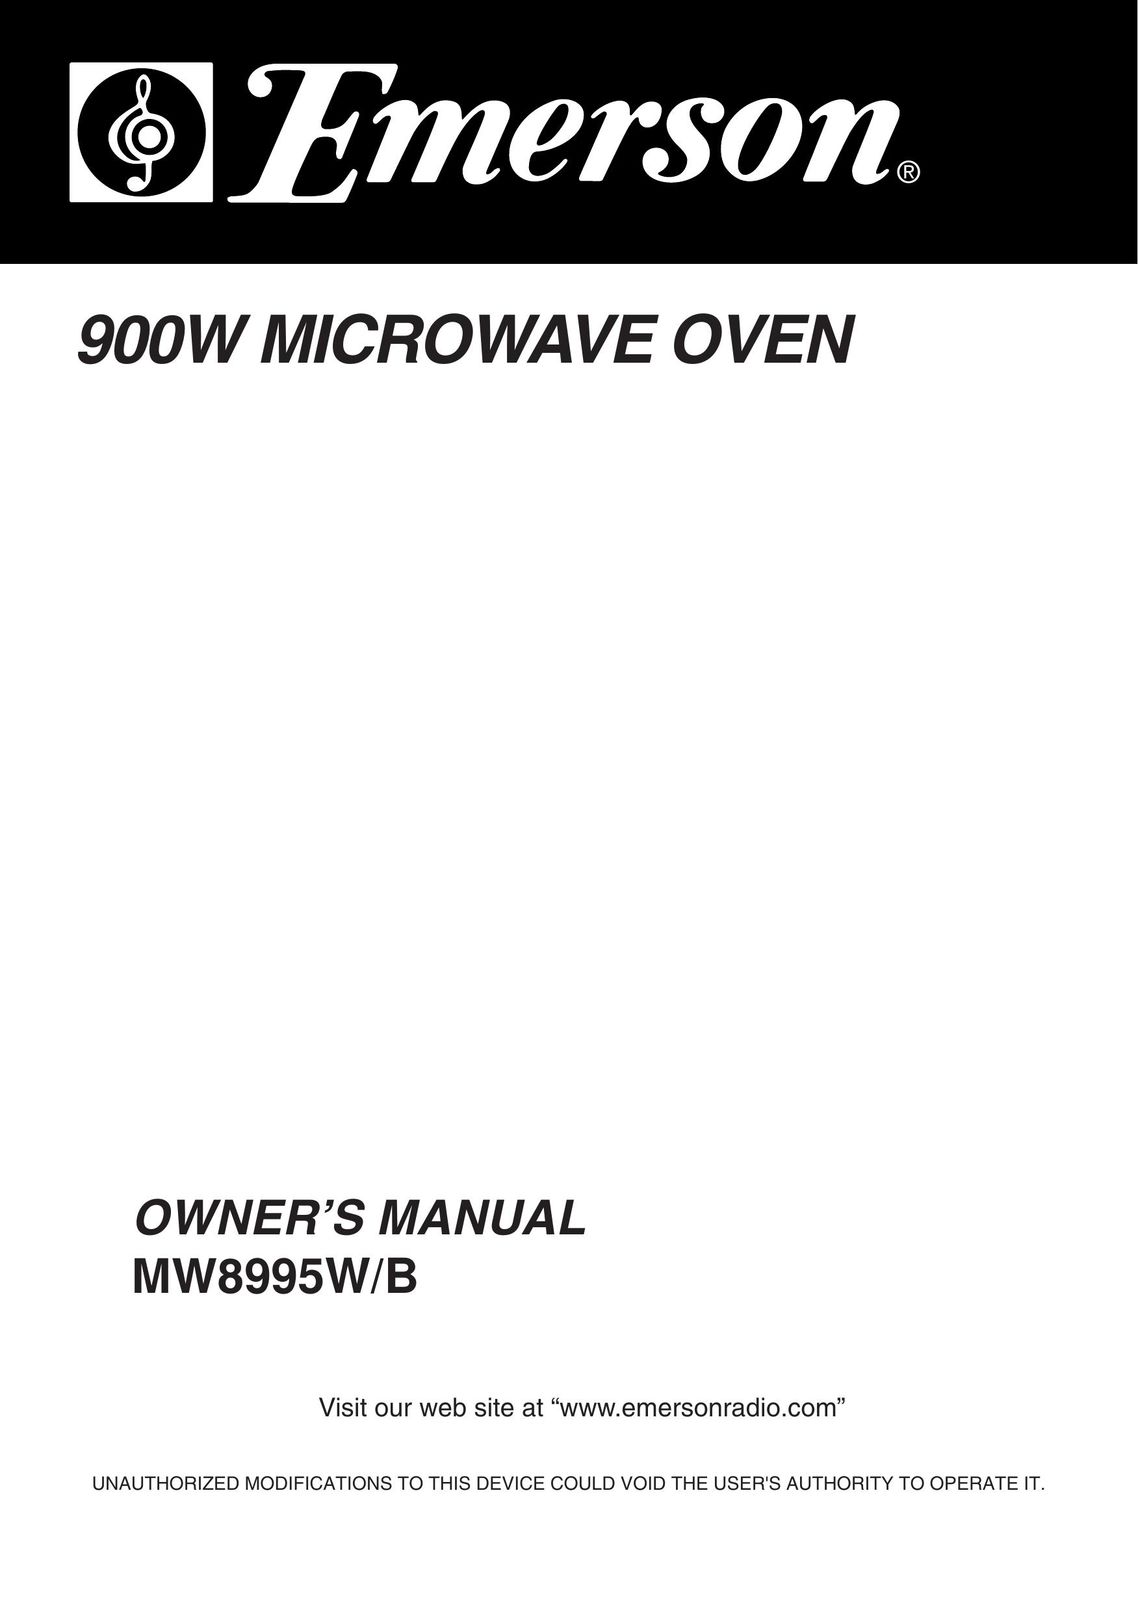 Emerson 900W Microwave Oven User Manual